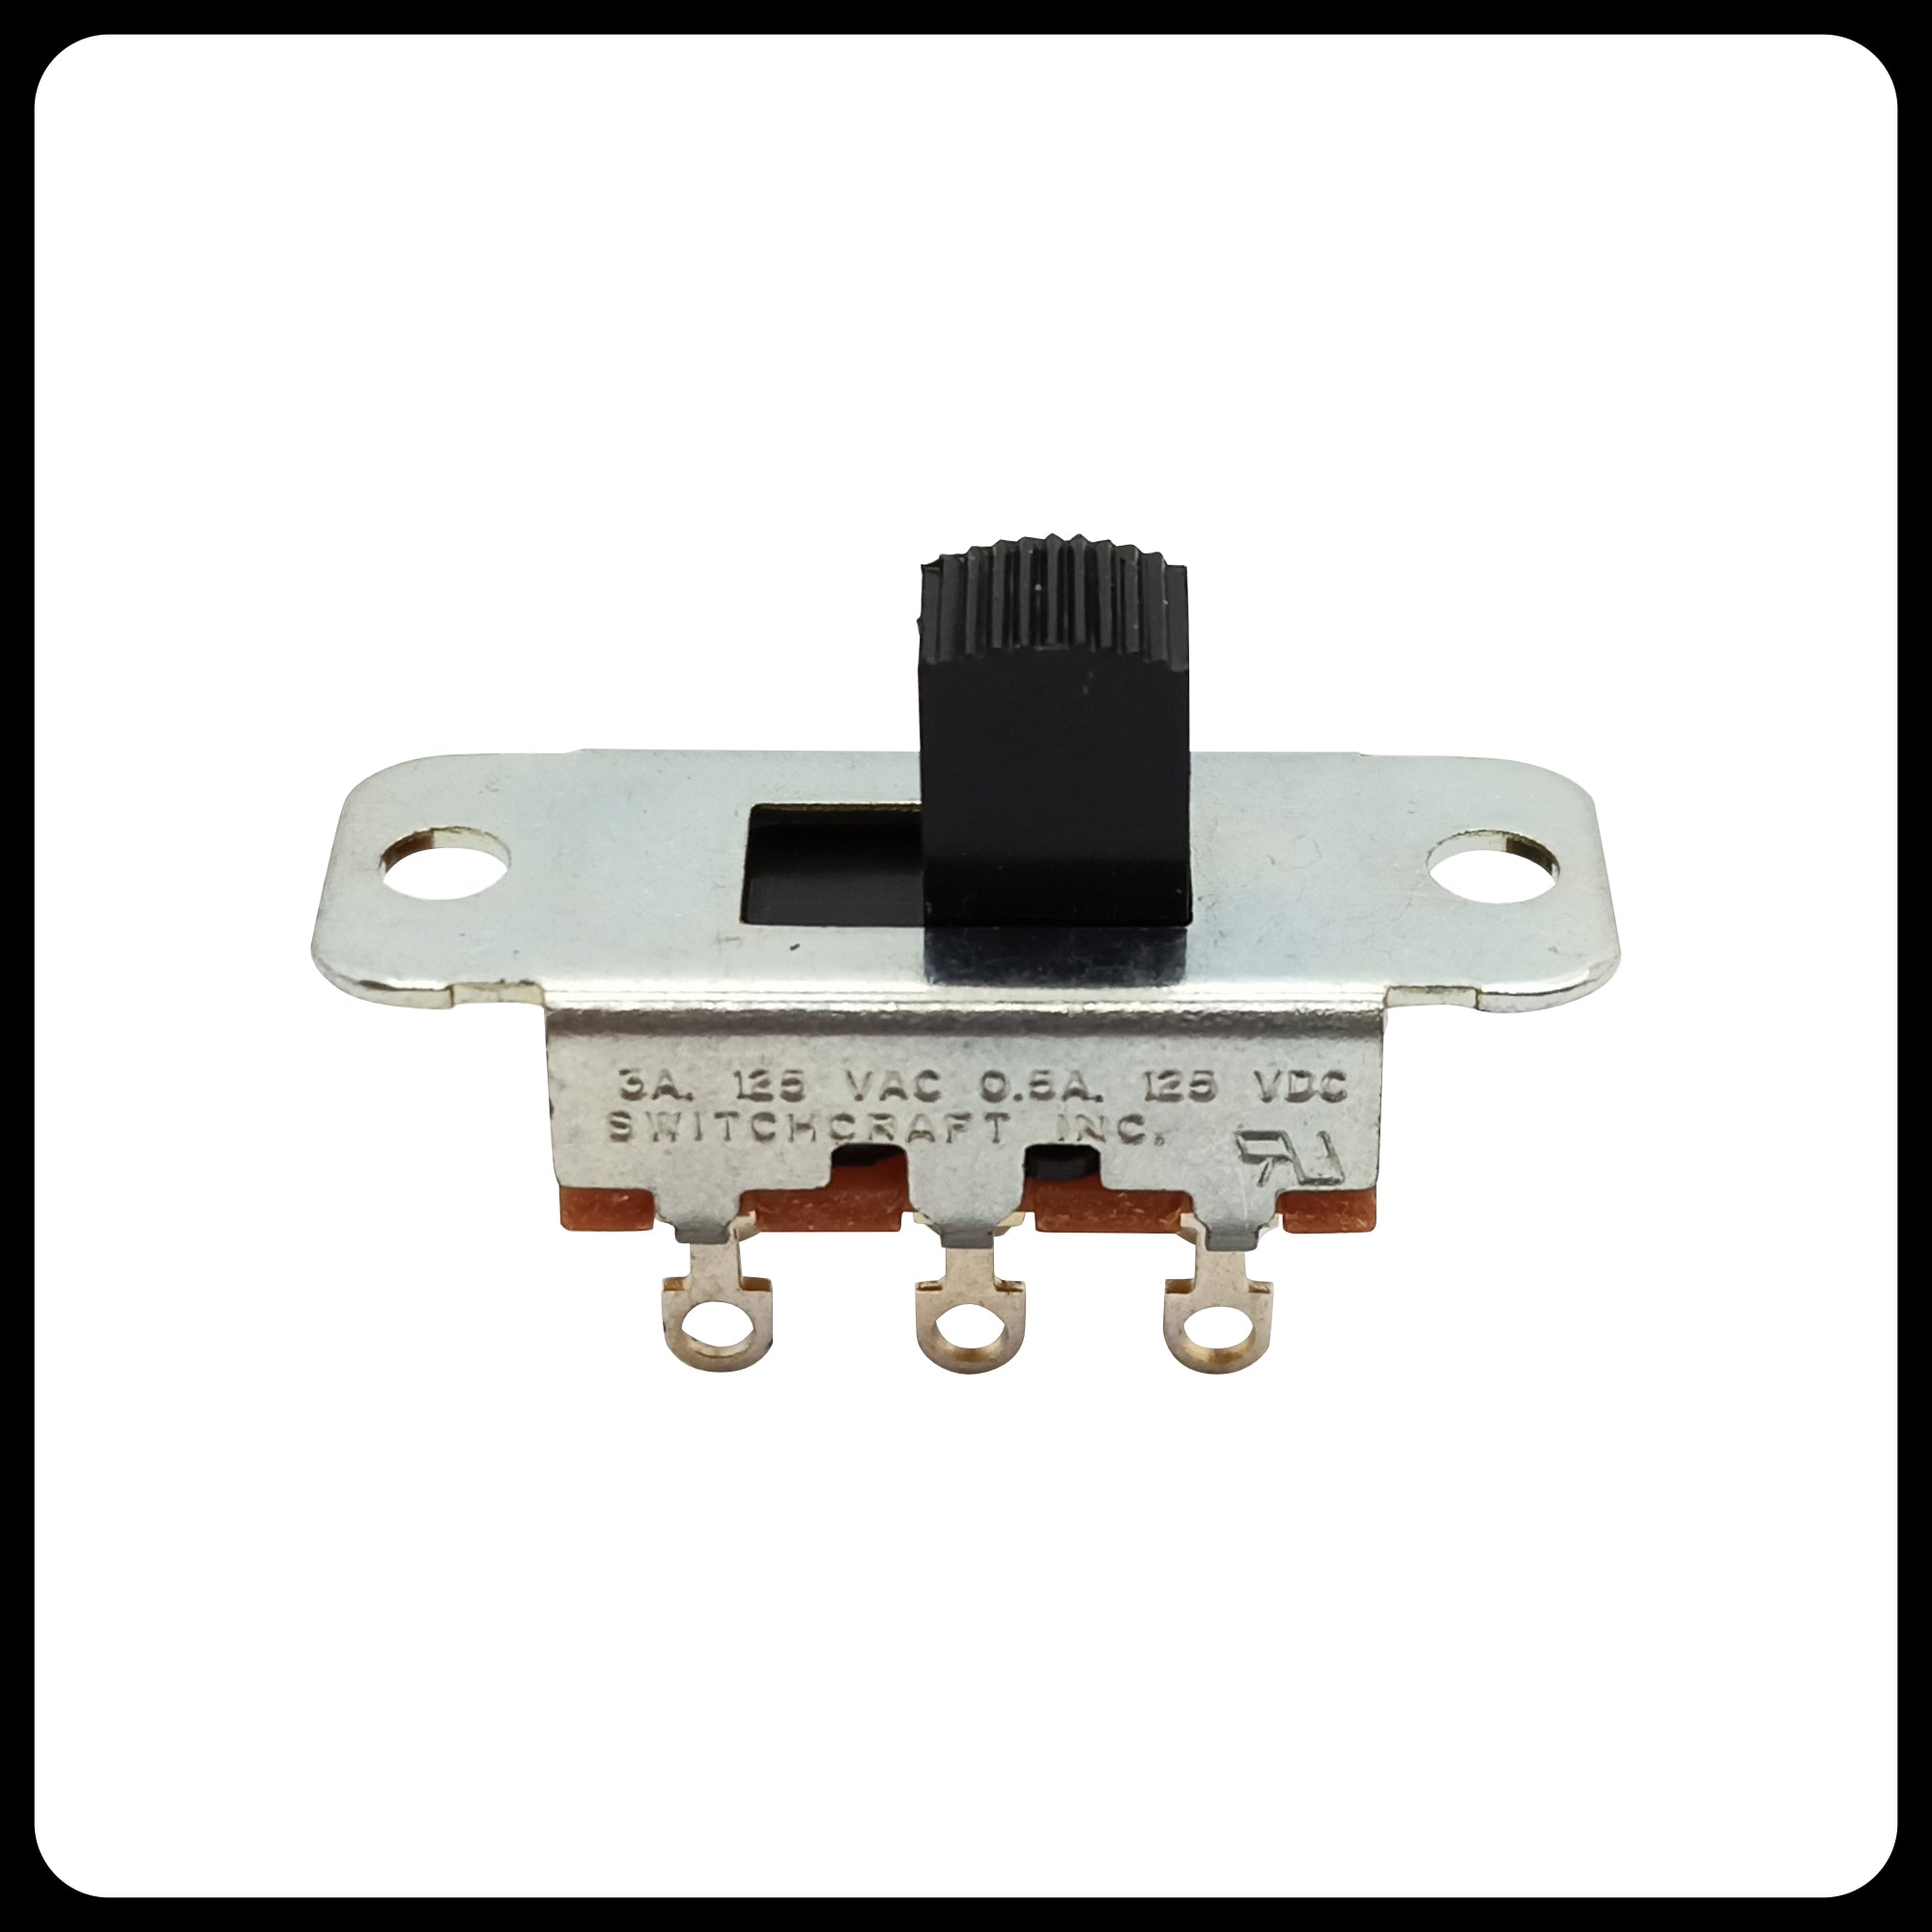 Switchcraft® Slide Switch for Mustang®, Duosonic®, Jazzmaster®, Jaguar® guitars and Brian May Wiring